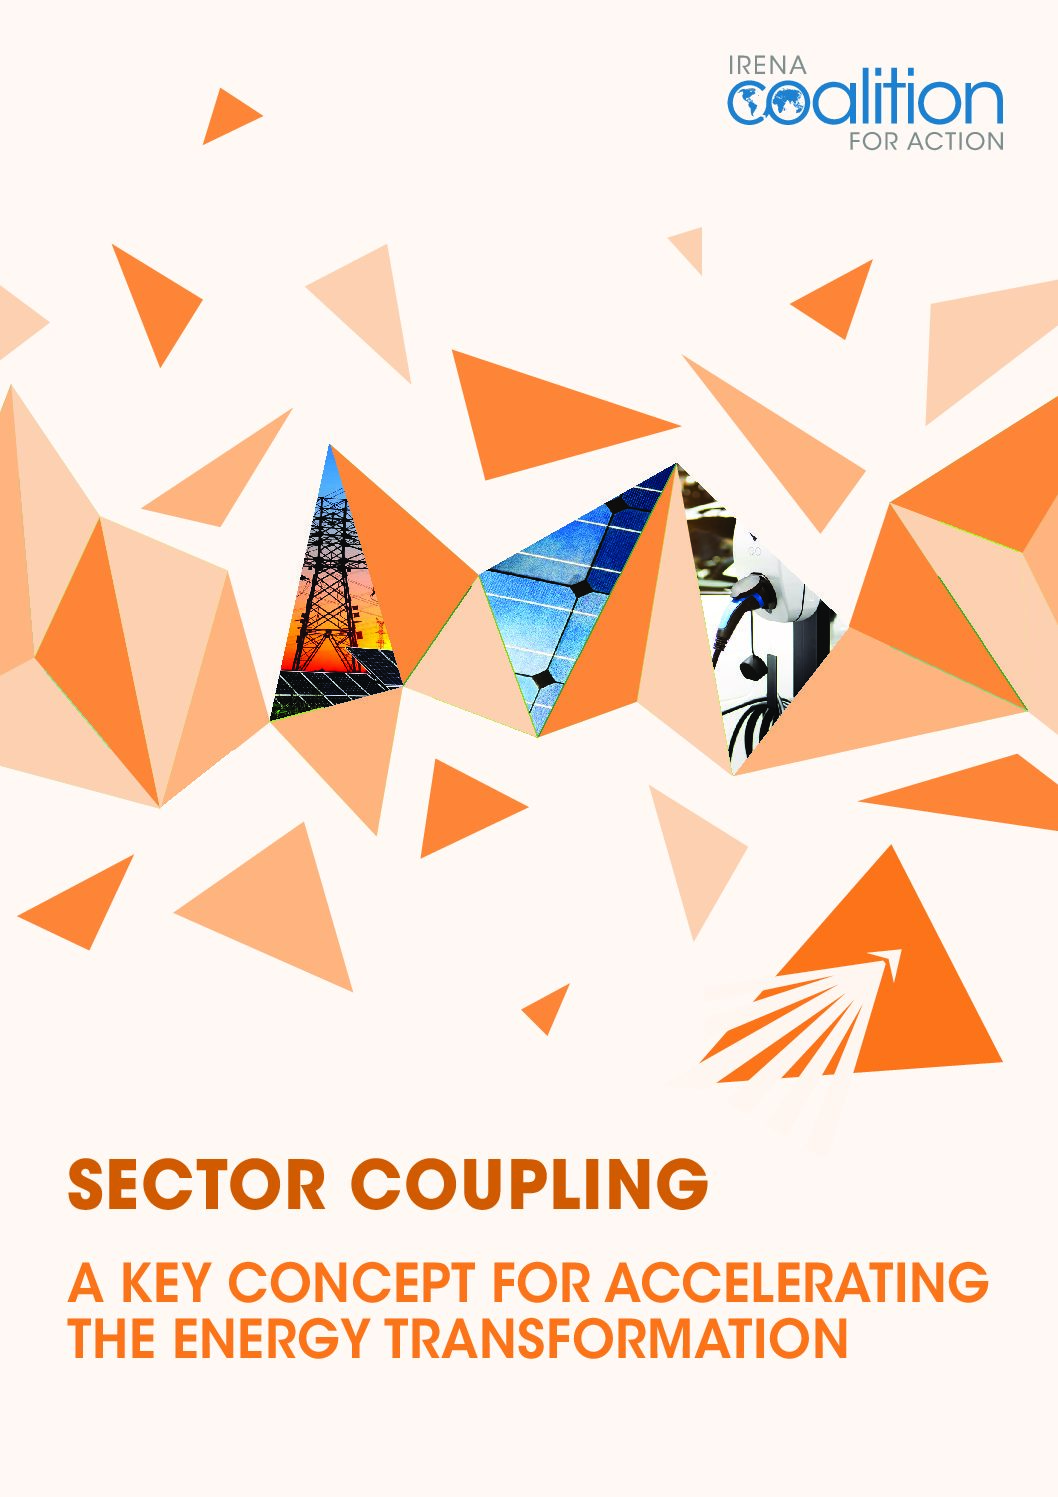 SECTOR COUPLING – A key concept for accelerating the energy transformation – IRENA